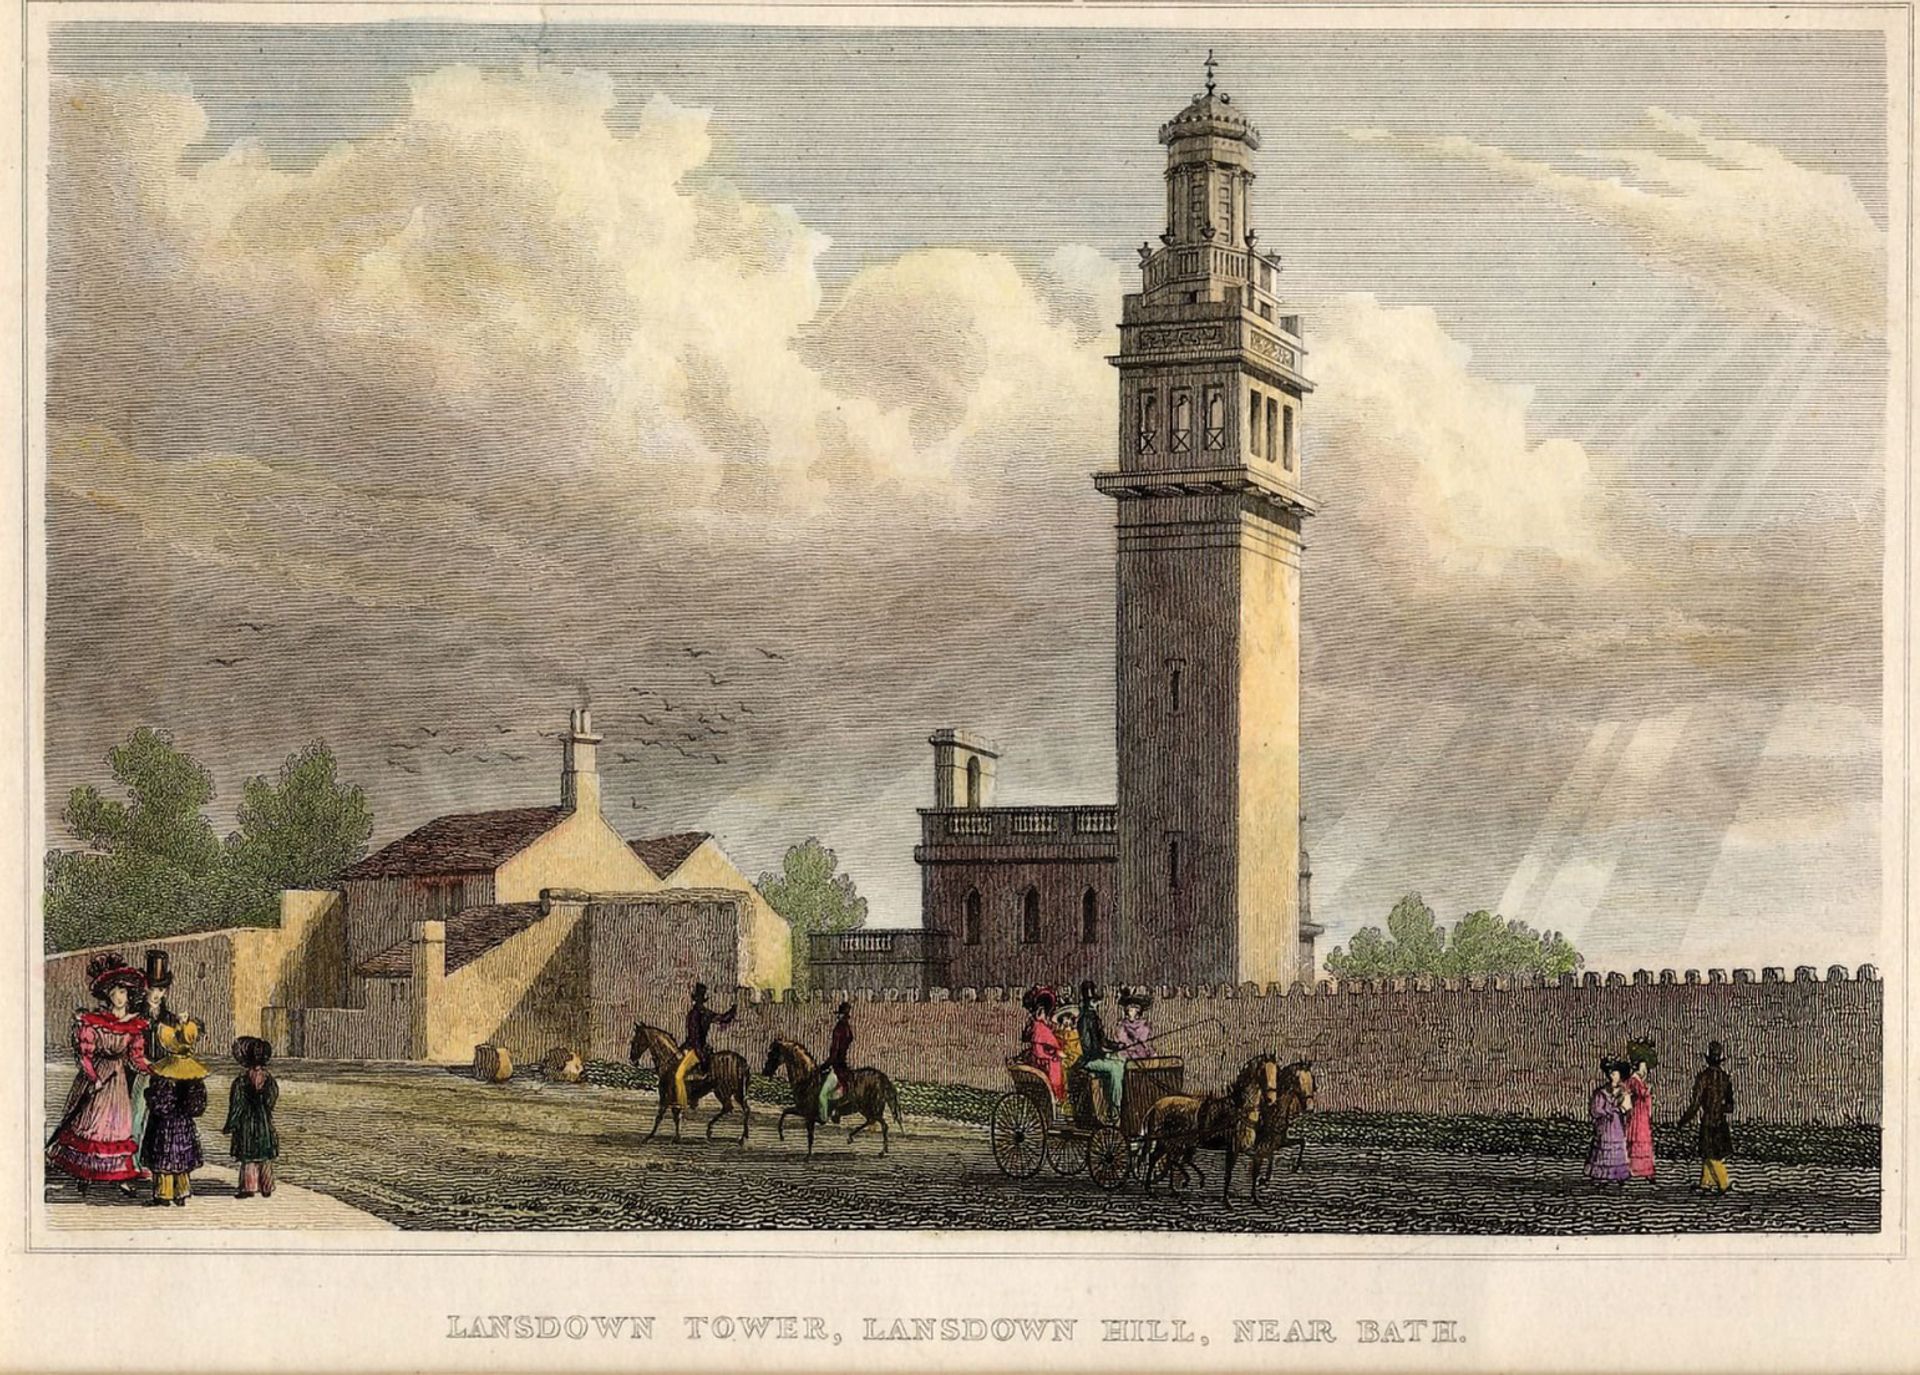 A 19th-century engraving of Beckford’s Tower, which was built between 1826 and 1827 by the writer, slave owner and collector William Beckford (1760-1840) and is now owned by the Bath Preservation Trust

© Beckford’s Tower and Museum; Bath Preservation Trust



